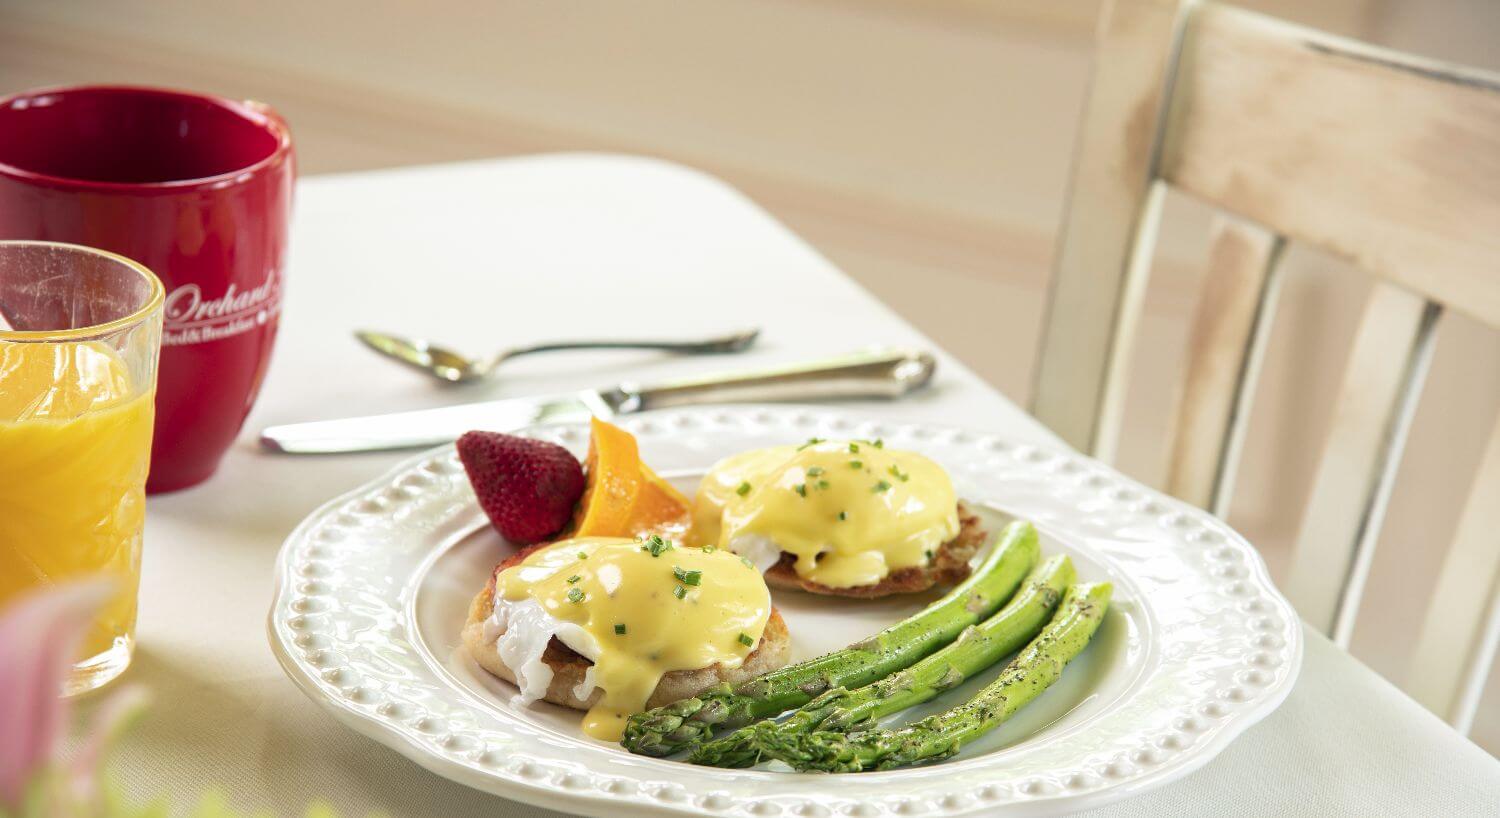 Eggs benedict served with asparagus on a white plate with fruit.